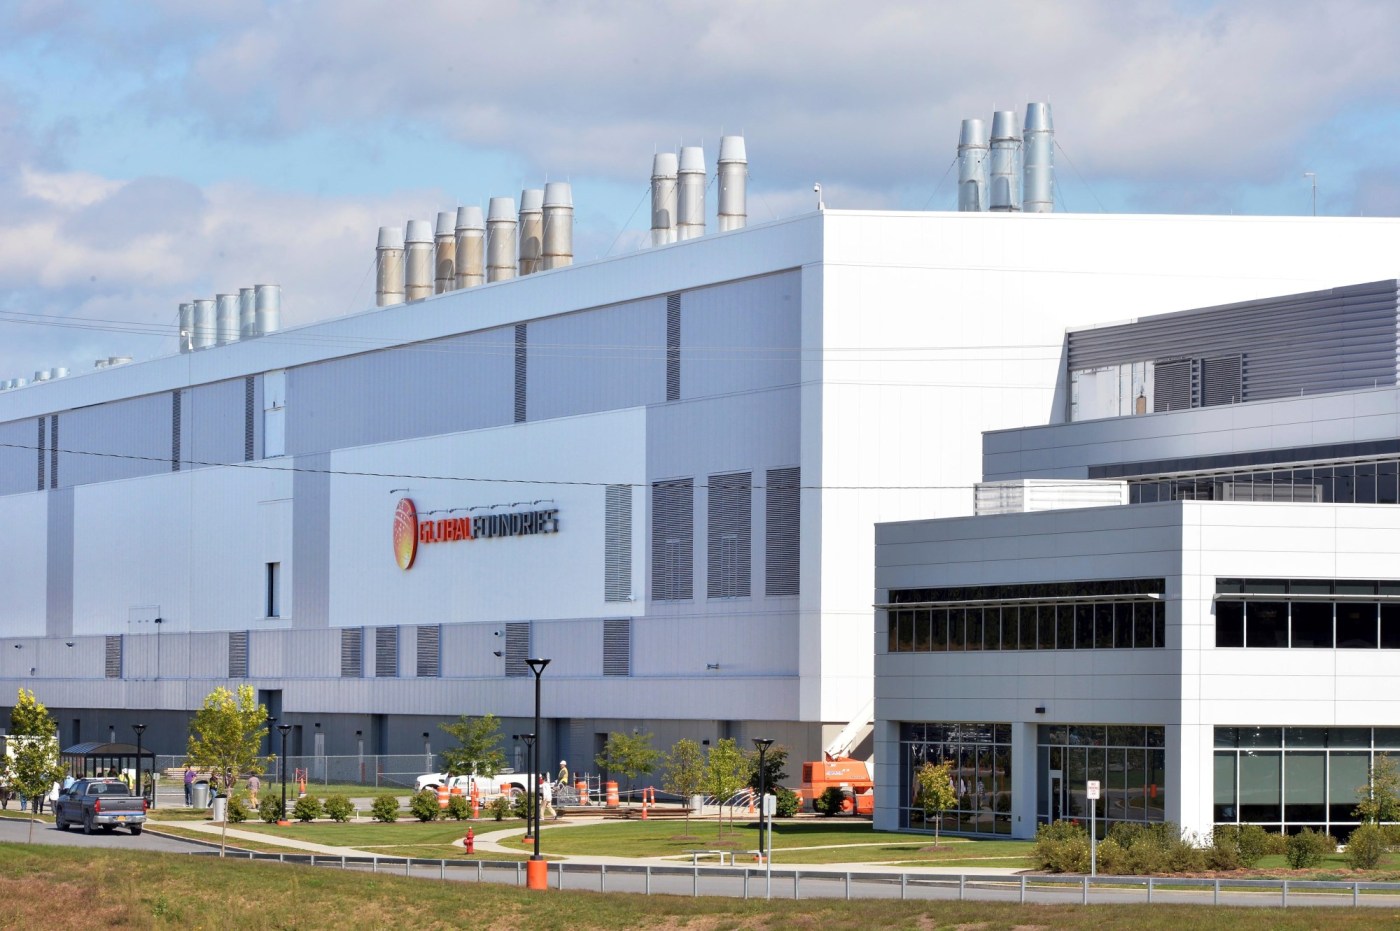 US awarding $1.5 billion to GlobalFoundries in Chips Act grant